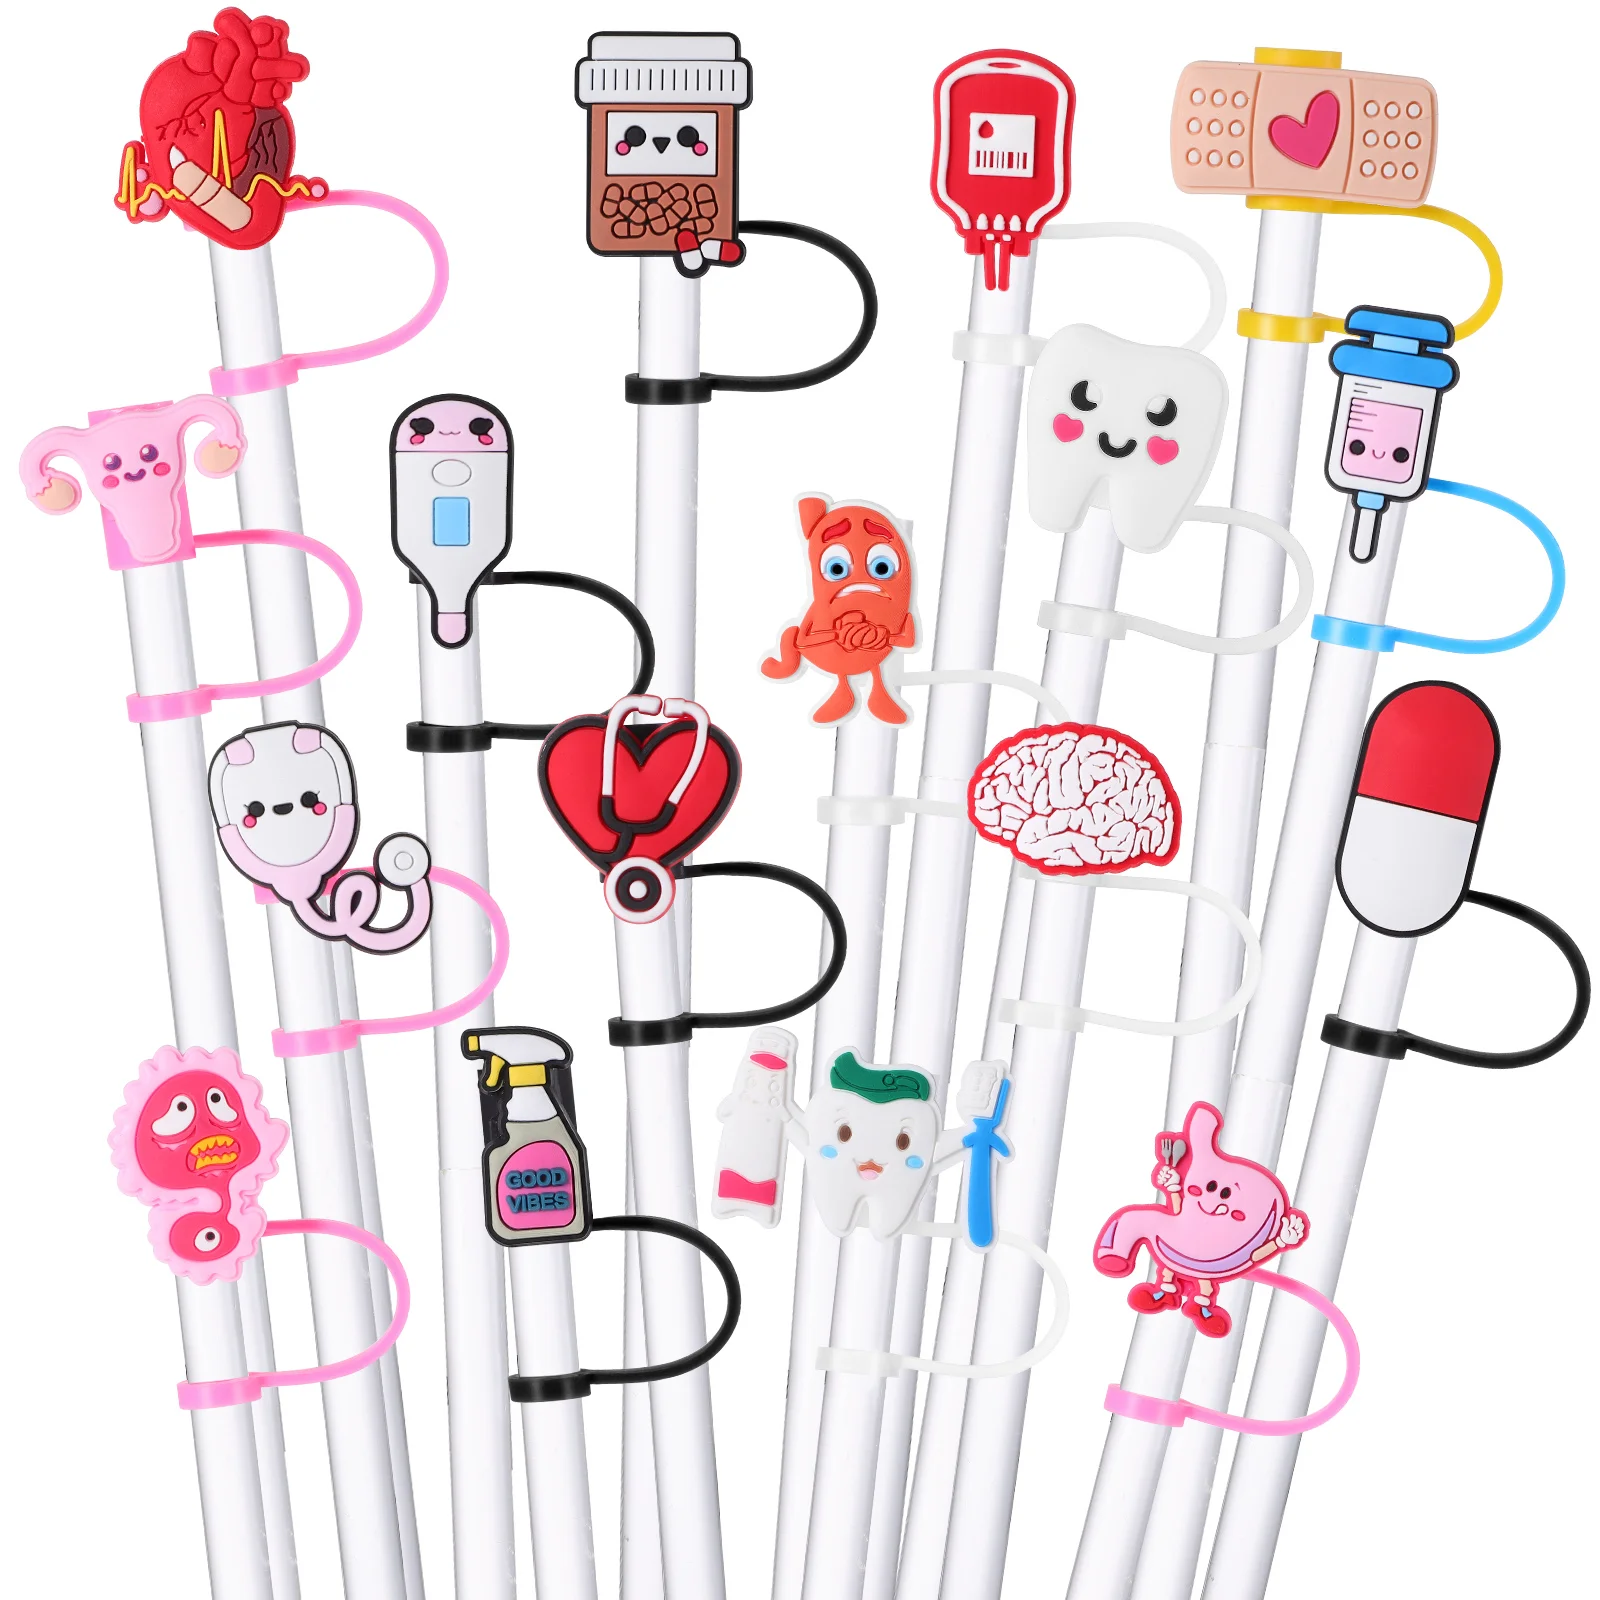 

17 Pcs Silicone Straw Tips Creative nurses day theme Cartoon Straw Covers Straw Plugs Drinks Cups Toppers Decorative Accessories